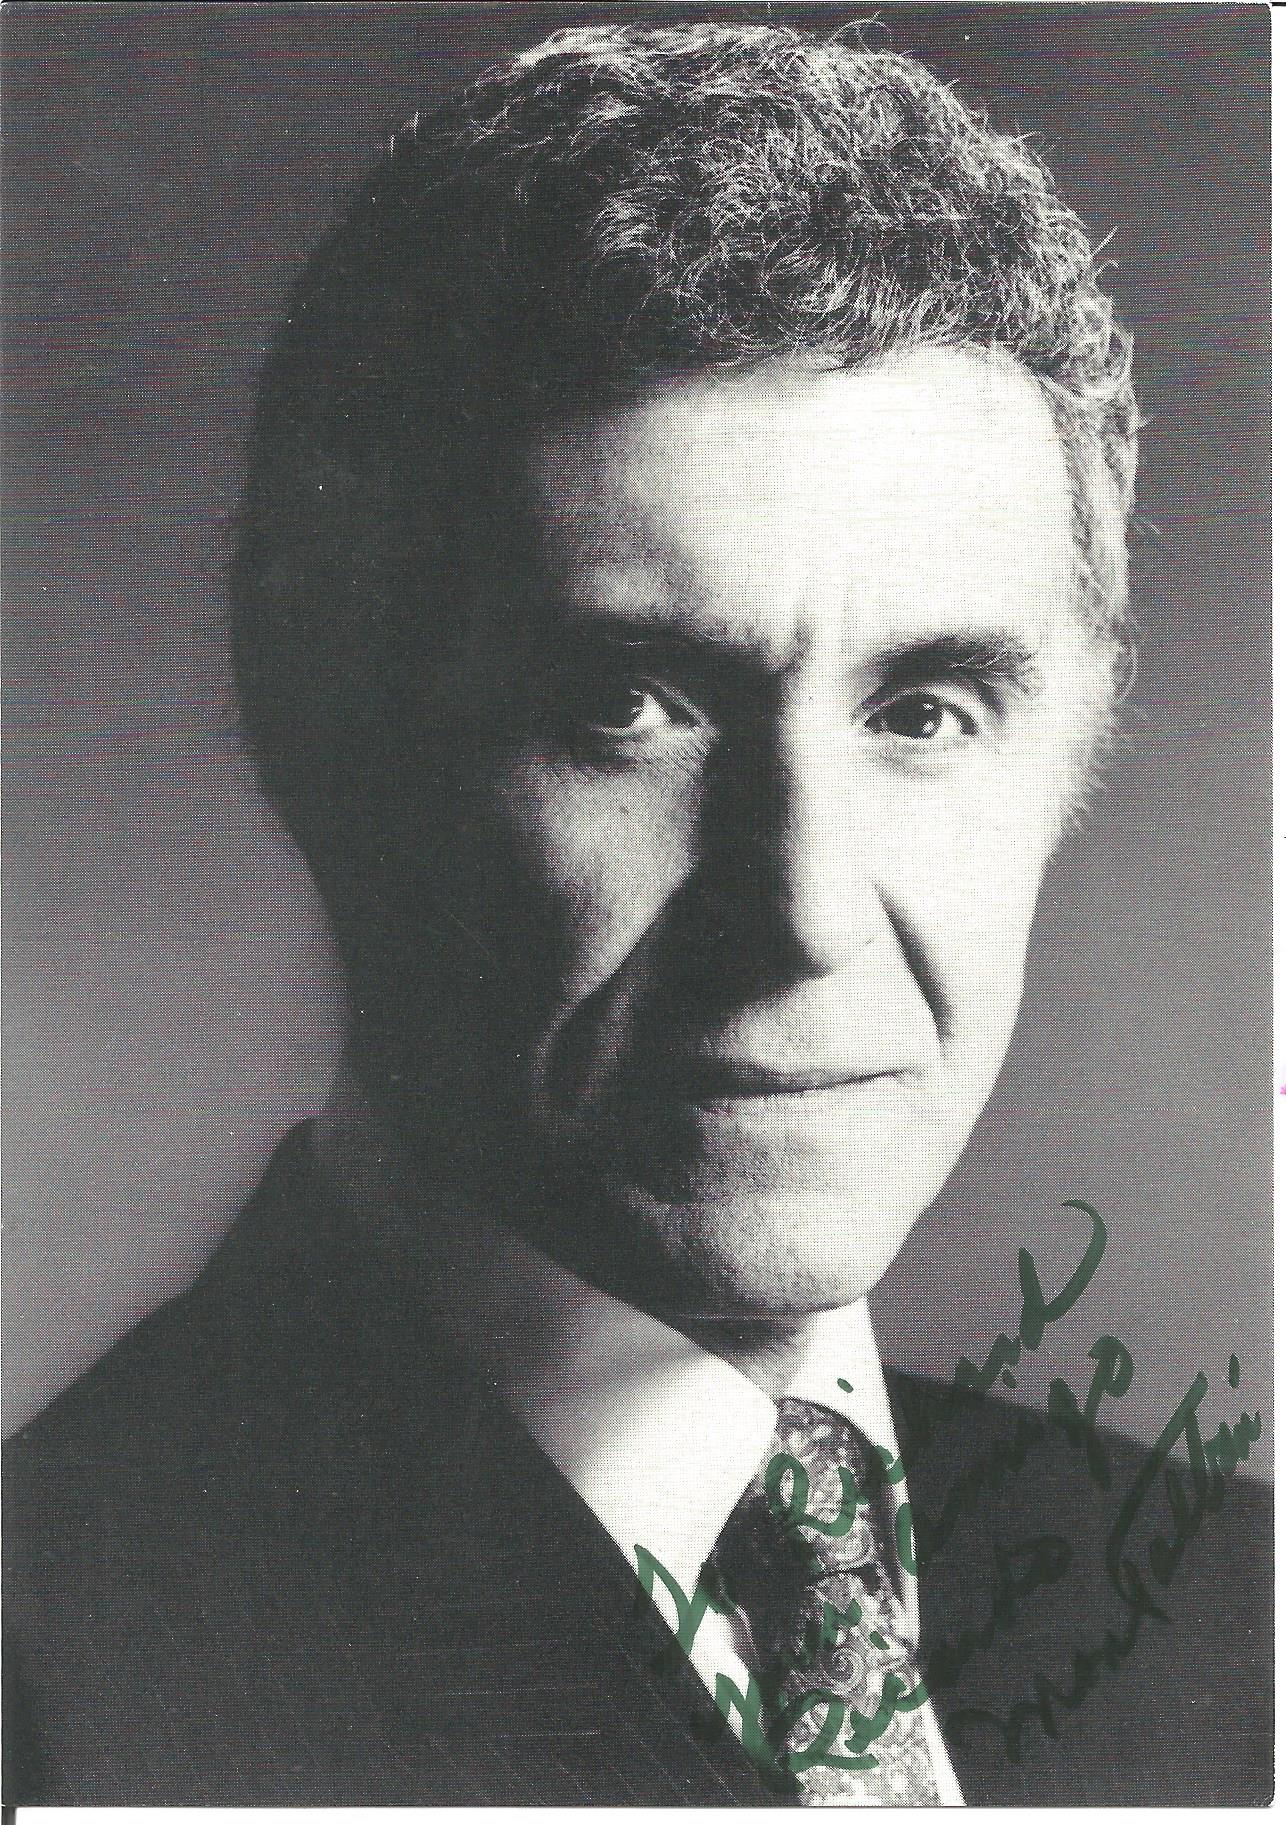 Ricardo Montalban signed 6x4 black and white photo dedicated. Good condition. All autographs come